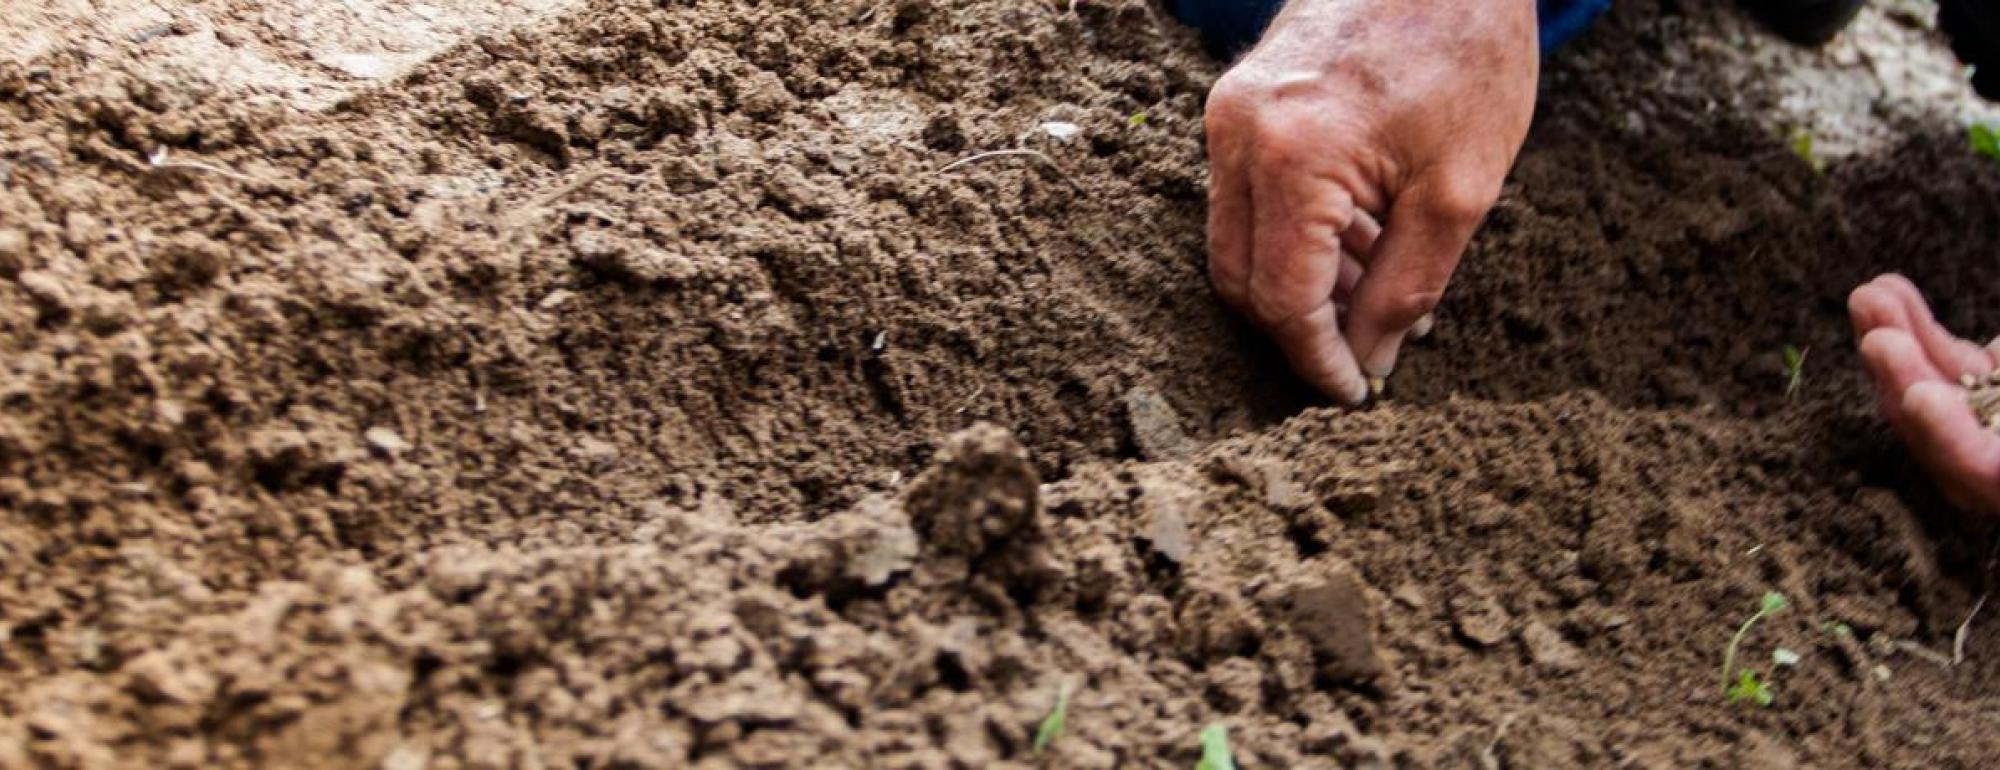 person planting seeds in soil